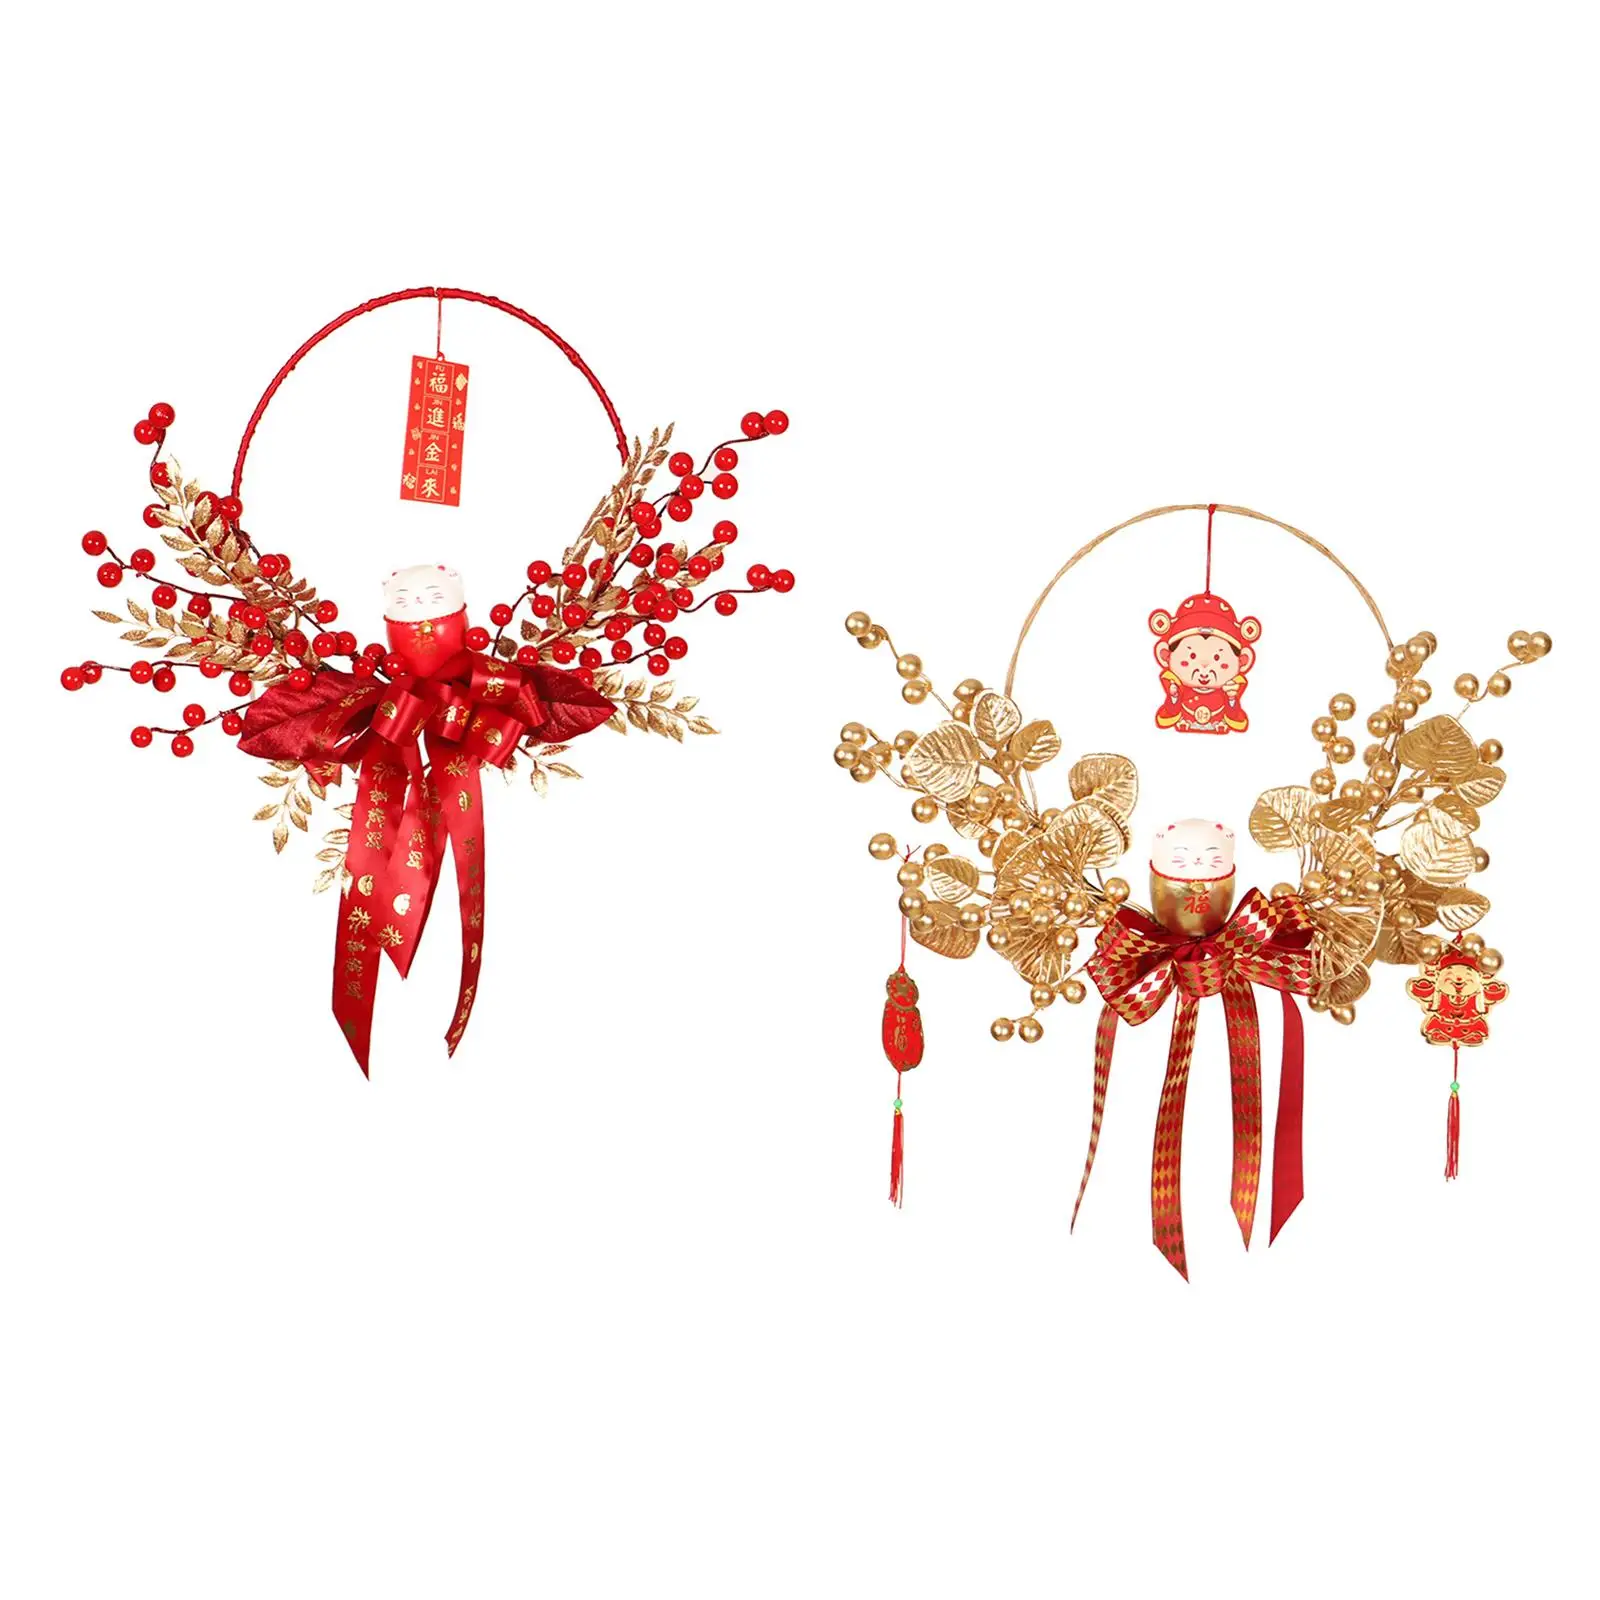 Chinese New Year Decoration Handcraft Metal Wall Hanging Wreath for Holiday